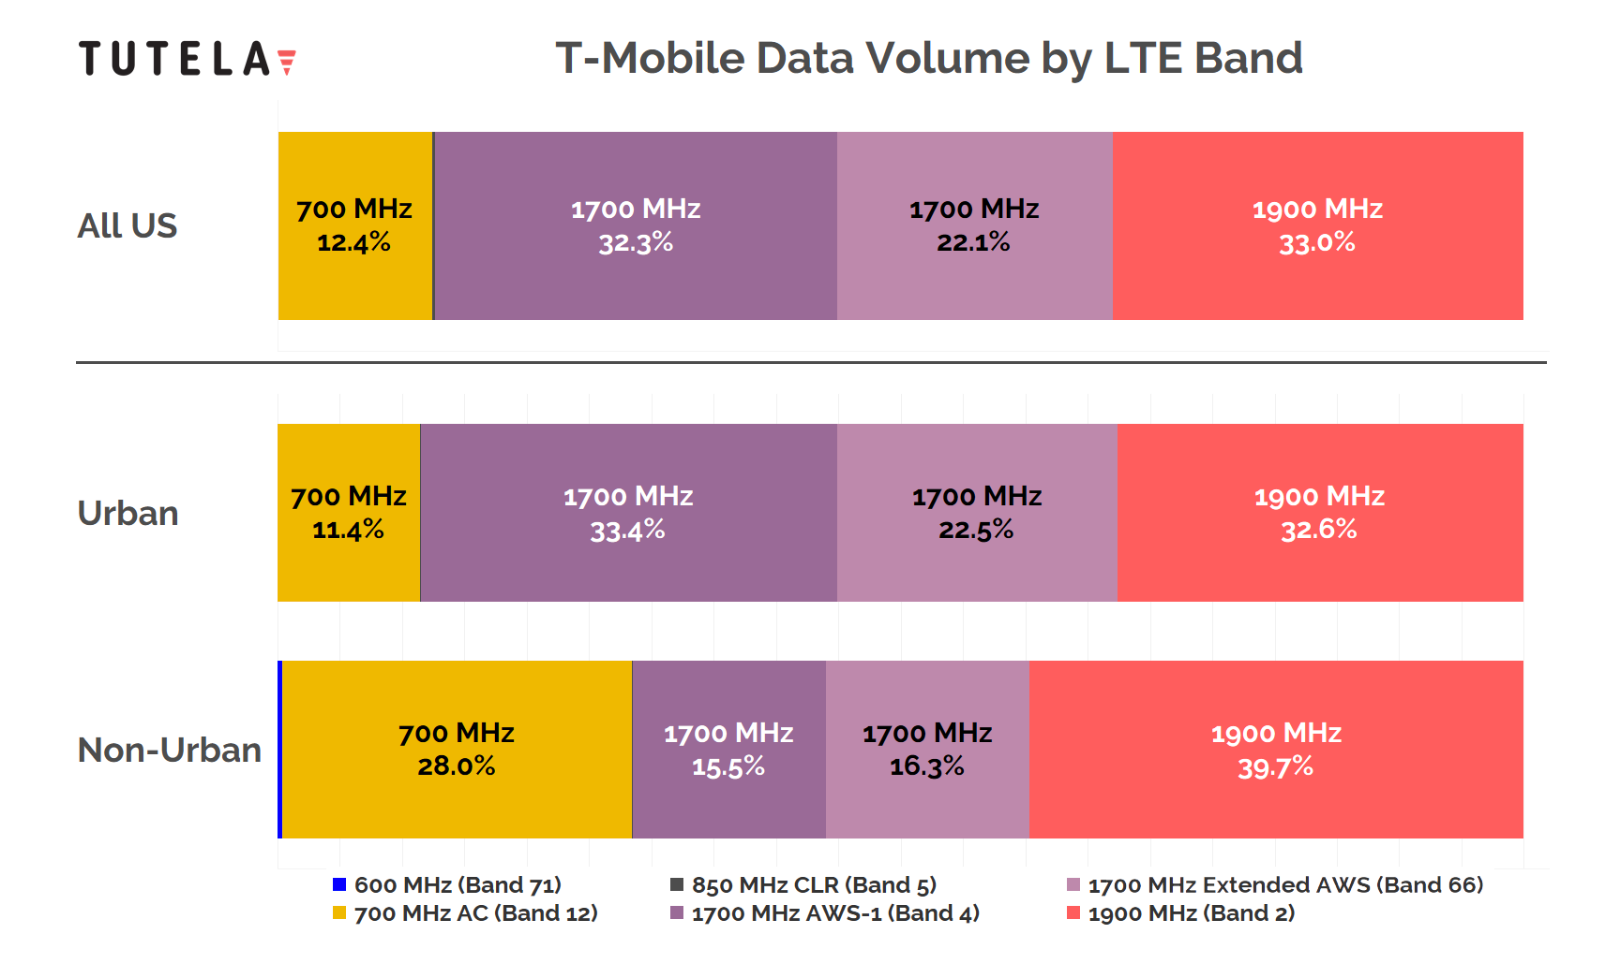 T-Mobile 4G LTE data by volume, breakdown as of December 2018 - Cheat sheet: which 4G LTE bands do AT&T, Verizon, T-Mobile and Sprint use in the USA?